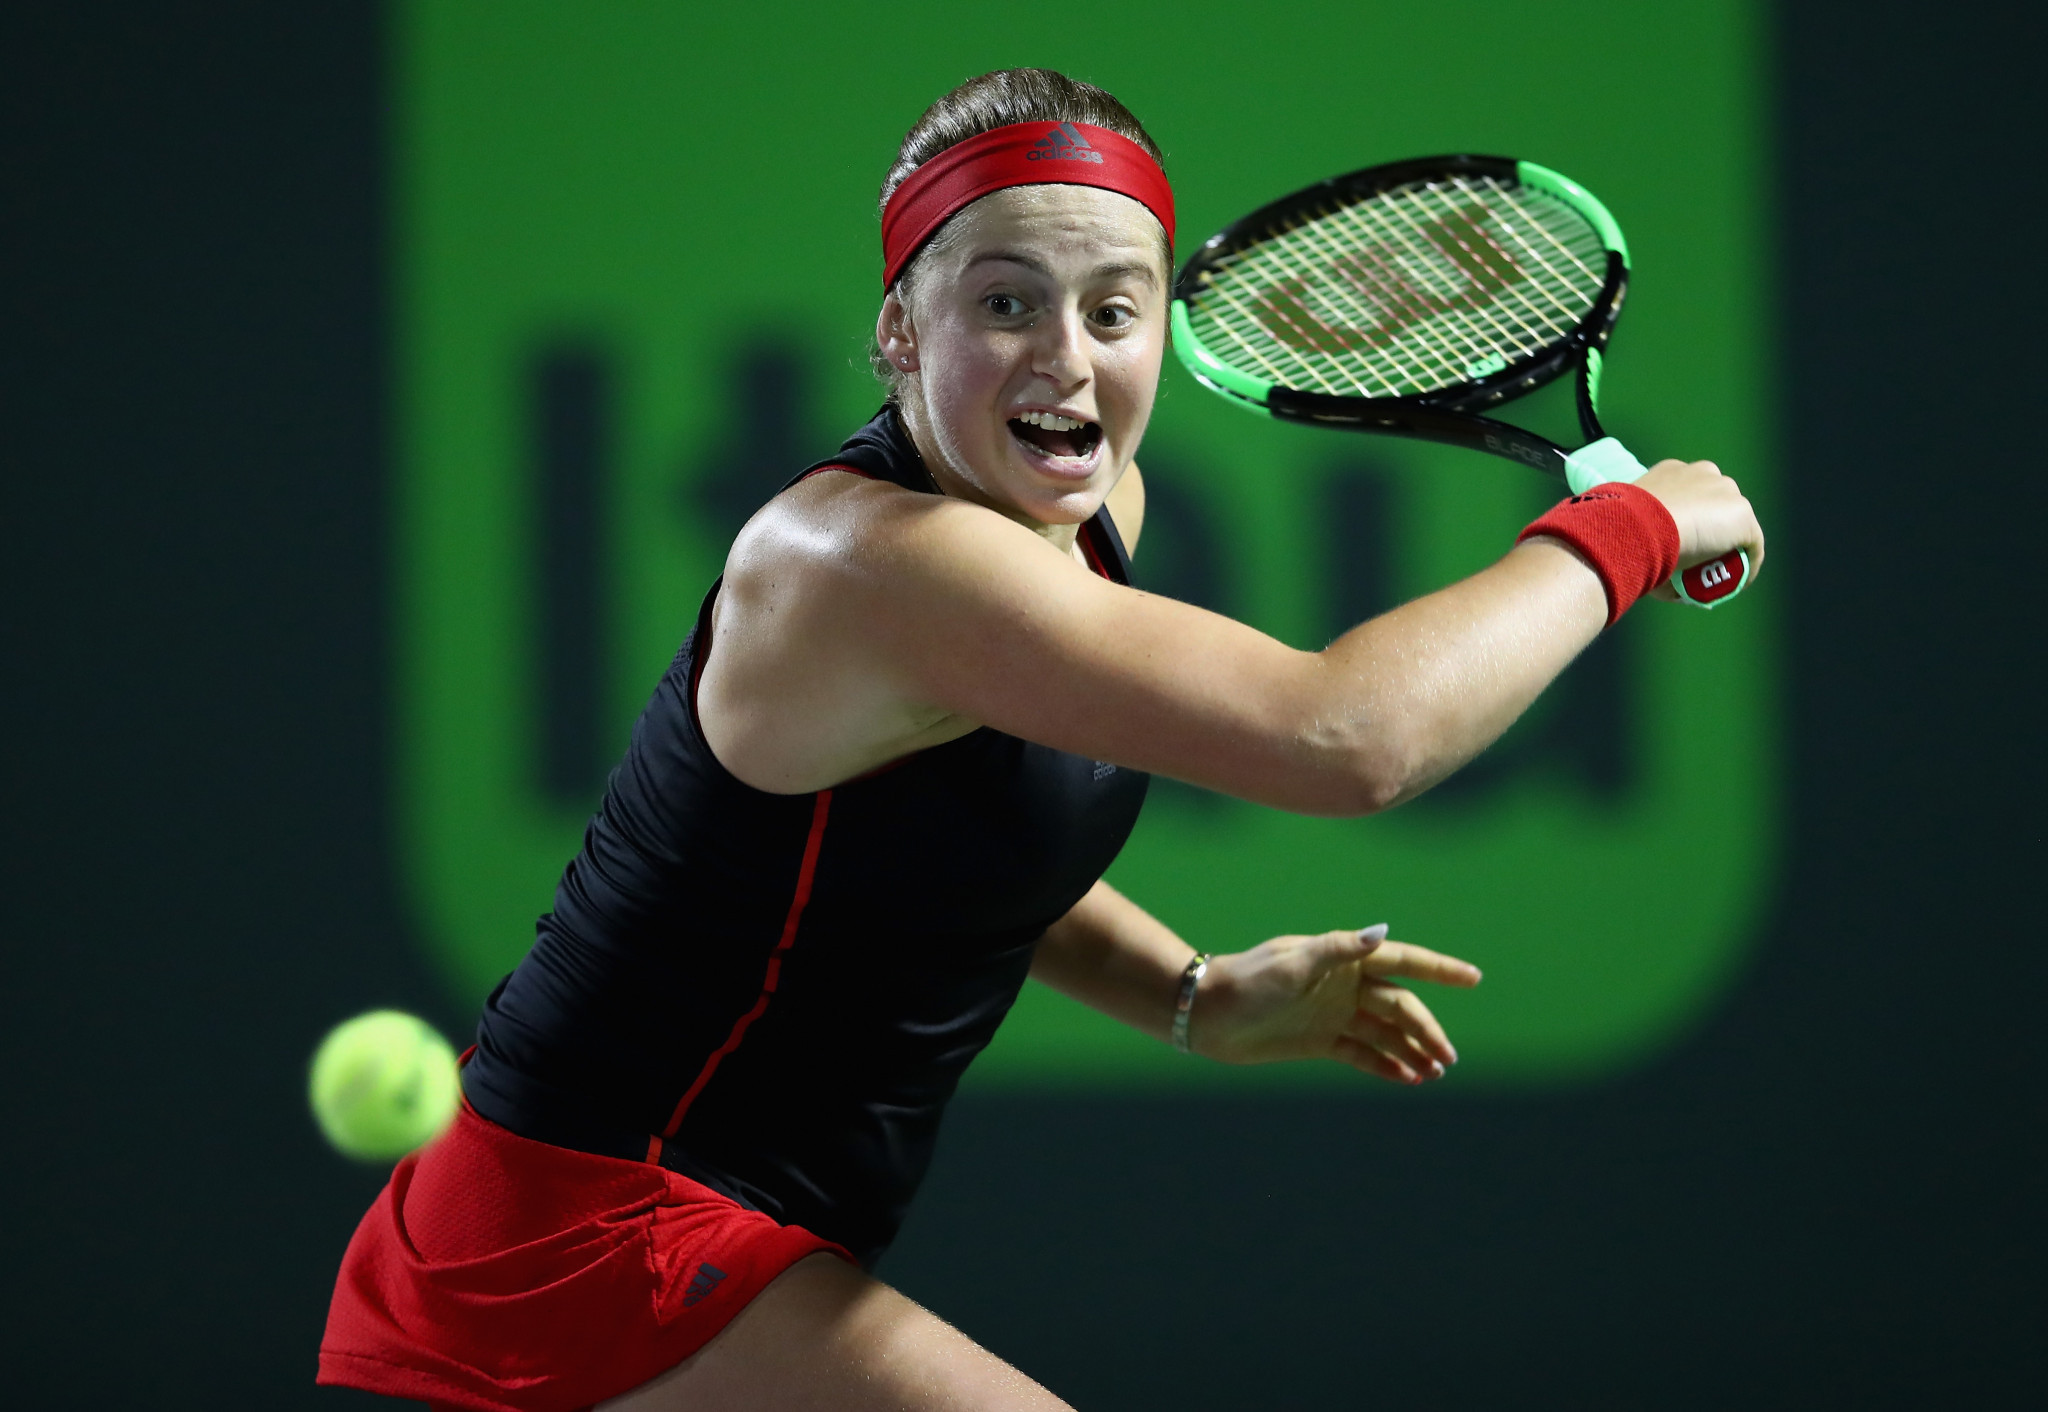 Sixth seed Jeļena Ostapenko will take on Sloane Stephens for the Miami Open crown ©Getty Images